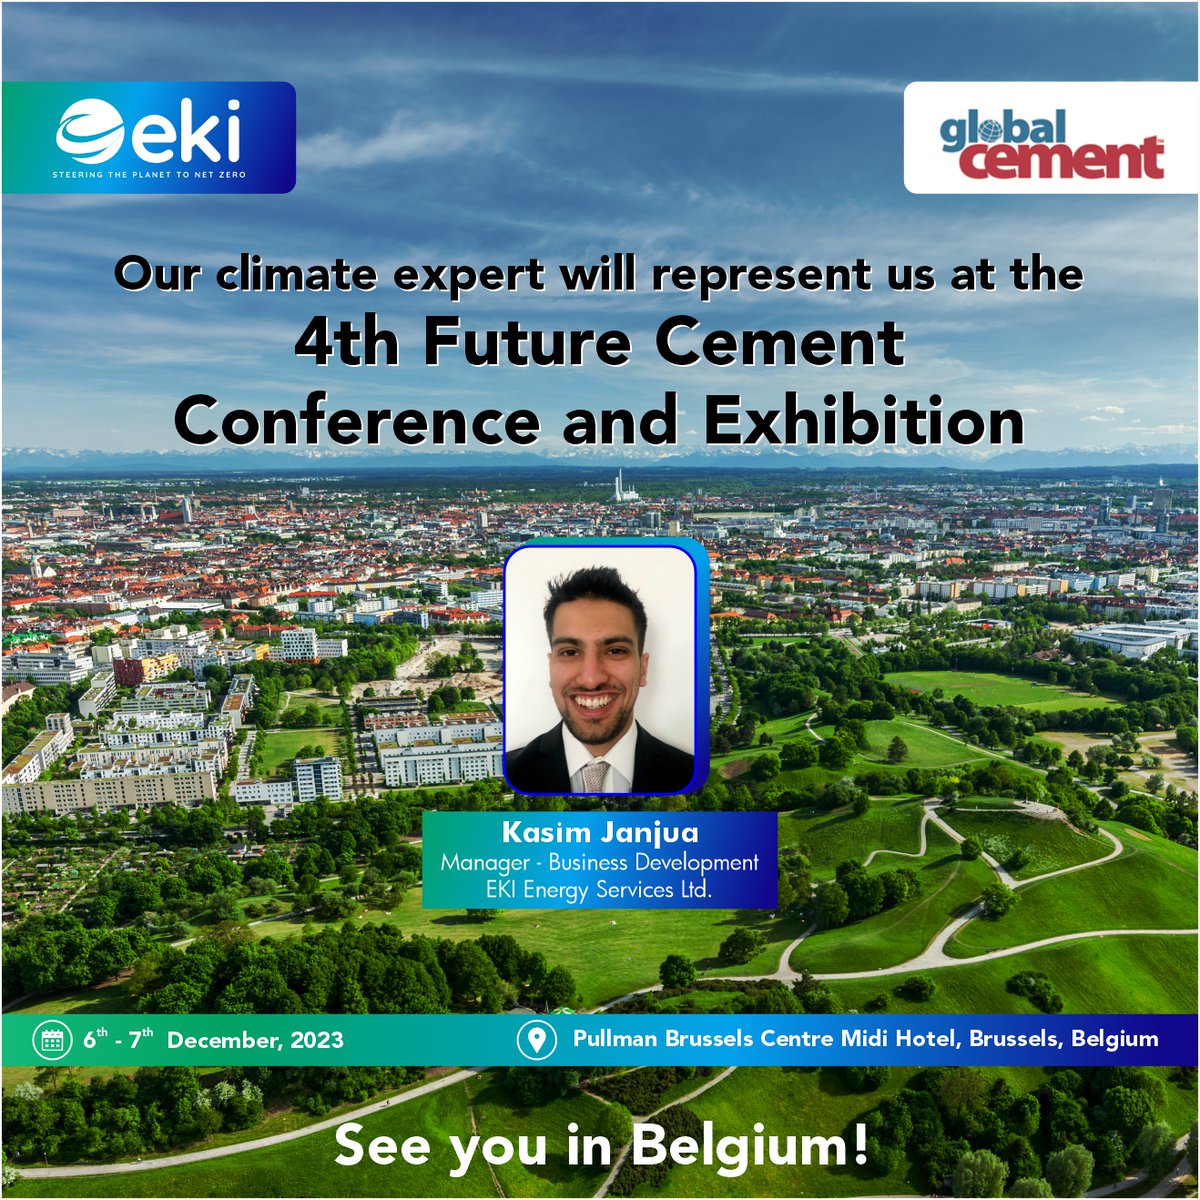 We are excited to see you at the 4th Future Cement Conference and Exhibition to be held in Brussels, Belgium, where we will discuss the roadmap to zero-carbon cement industry.

#GreenBuildingMaterials #ClimateAction
#CementIndustry #EKI #EKIEnergy #EKIEnergyServices #Enking